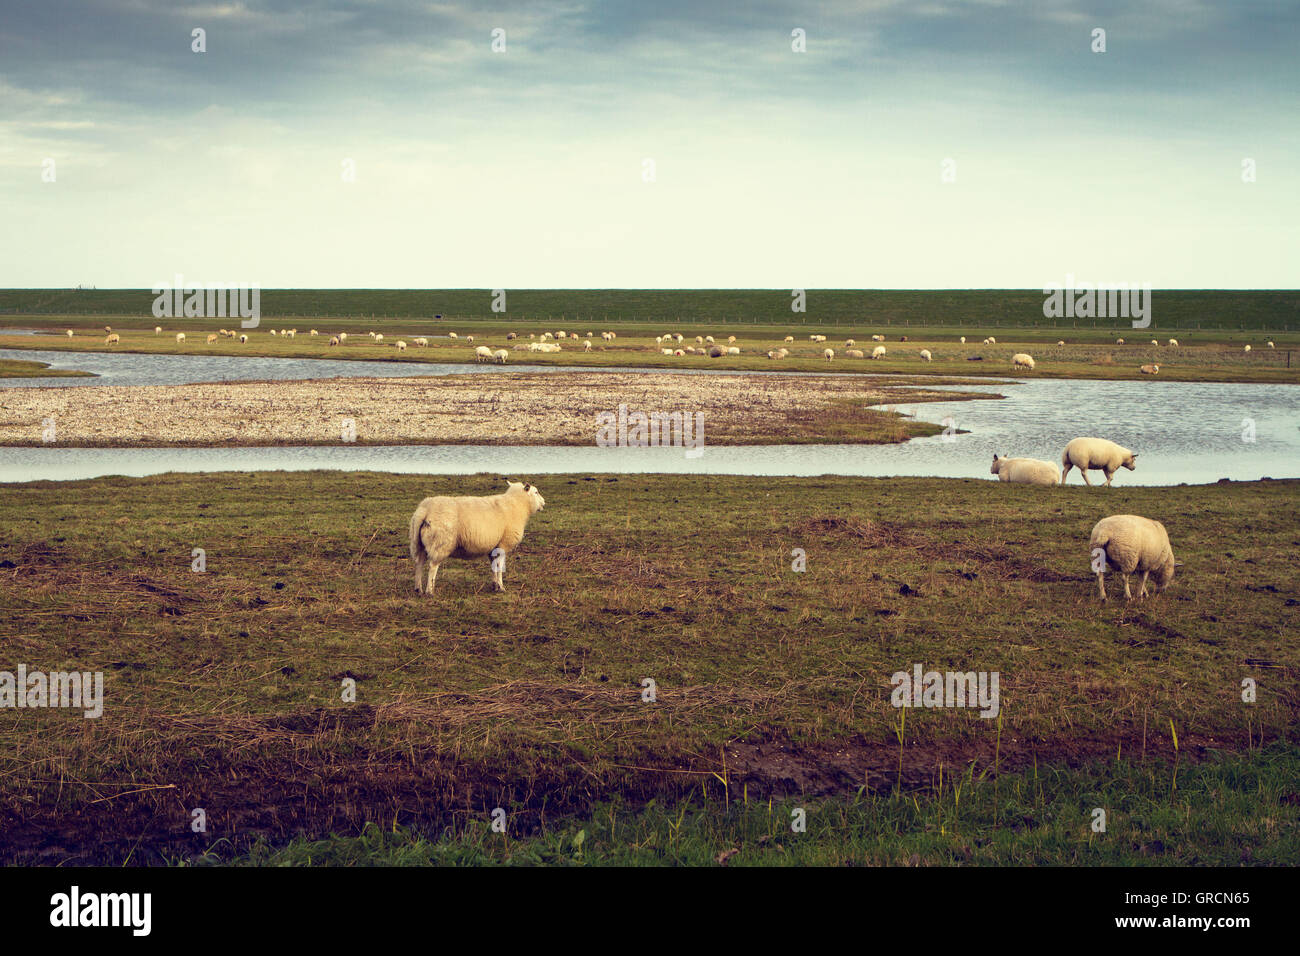 Texel Sheep In Classic Alien Environment Stock Photo